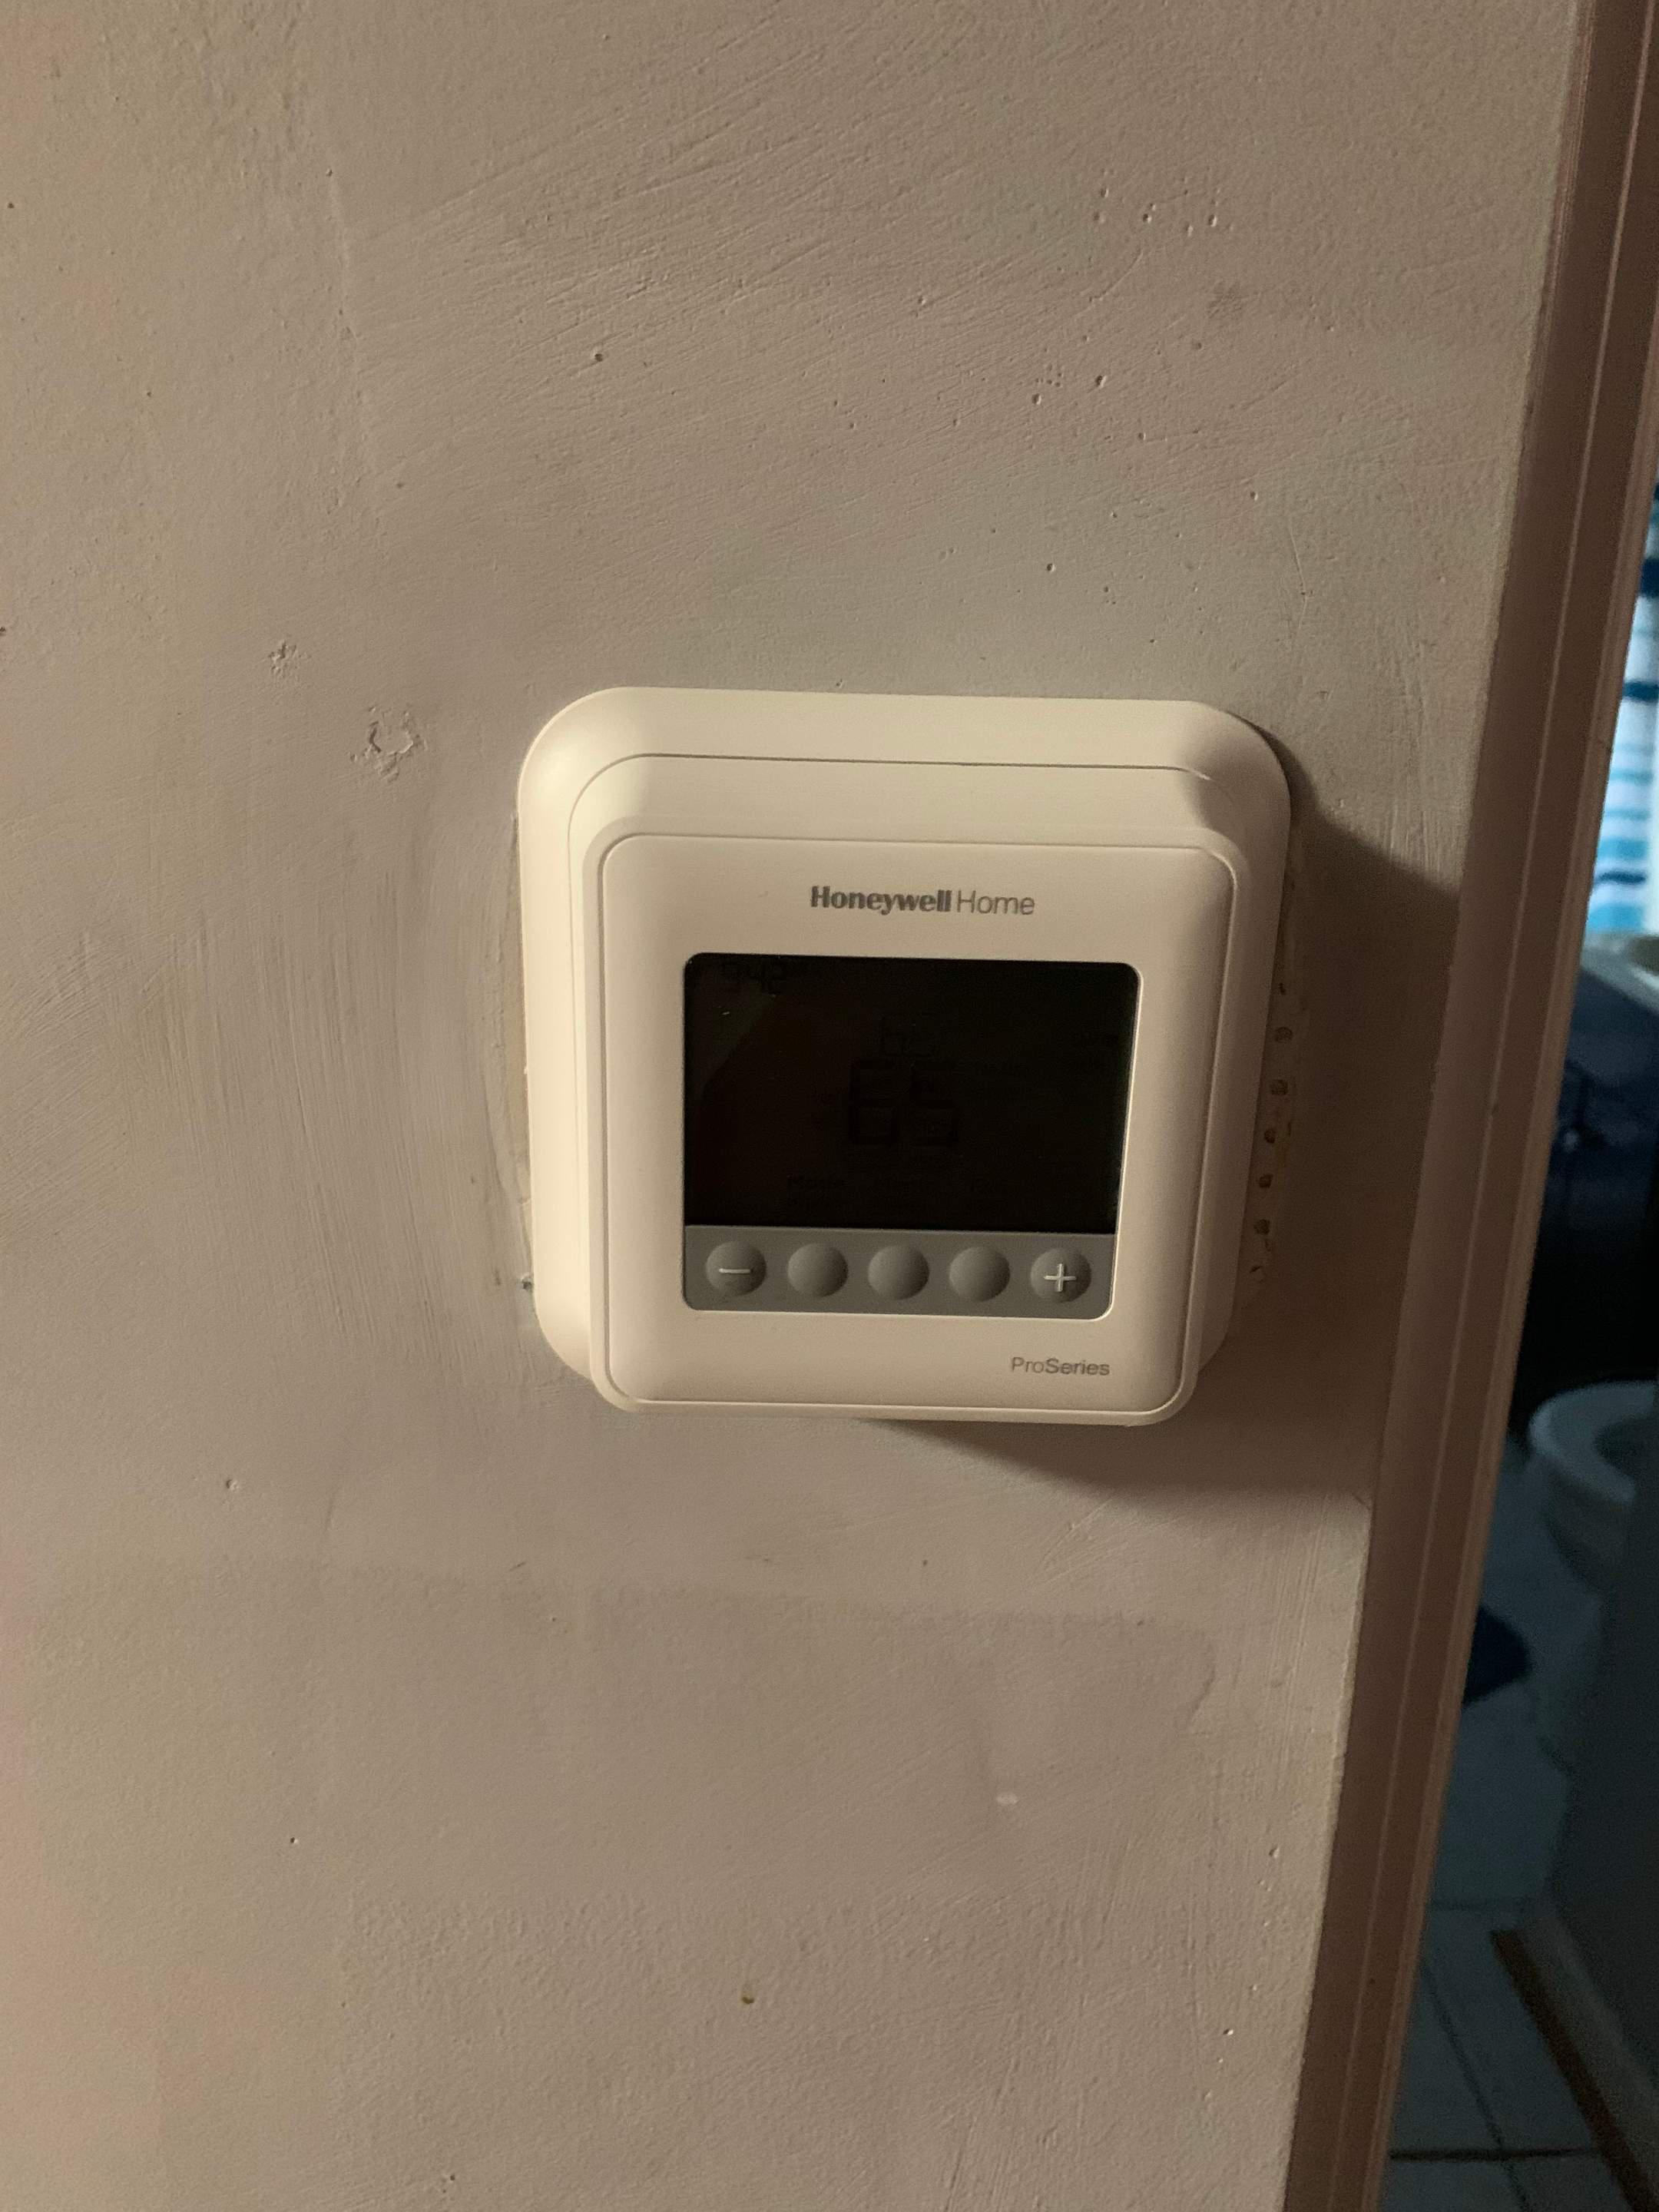 fry plumbing, heating, and cooling thermostat